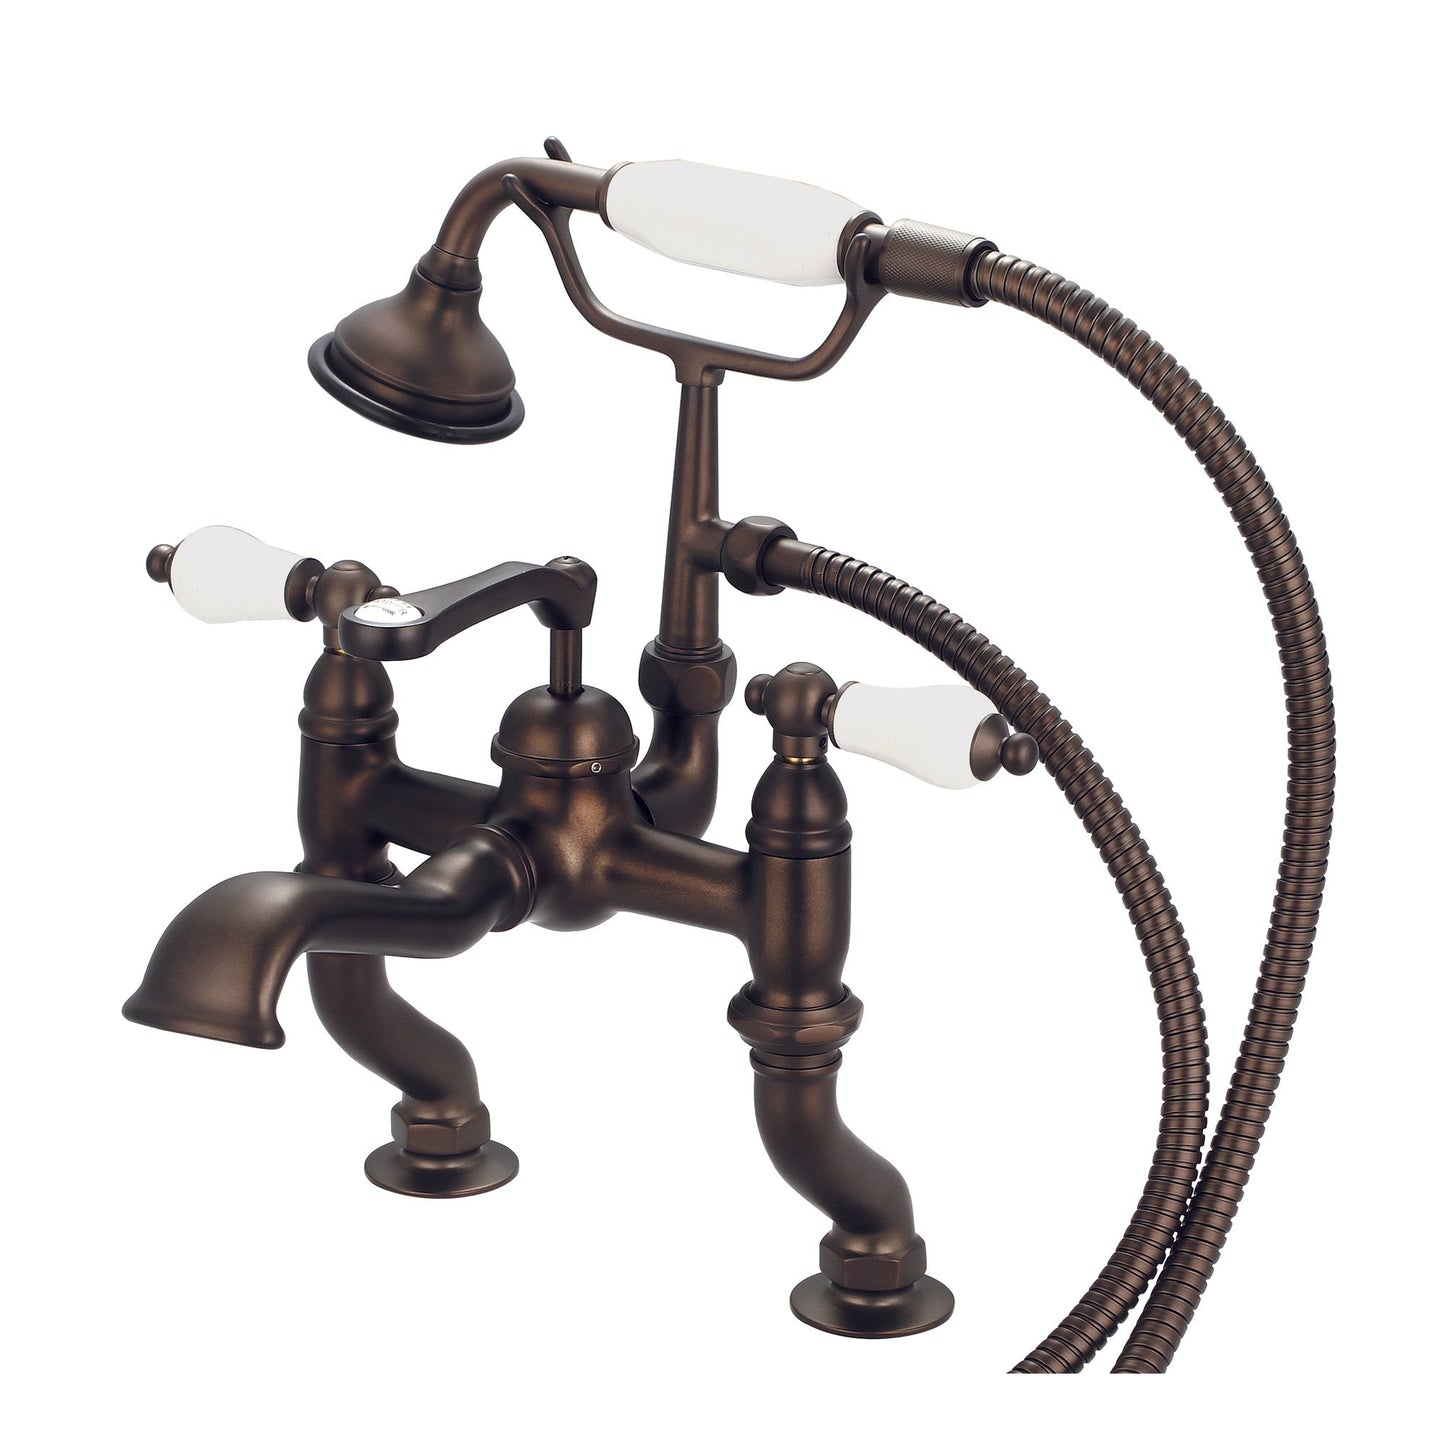 Water Creation Vintage Classic Adjustable Center Deck Mount Tub F6-0004 3.25" Brown Solid Brass Faucet With Handheld Shower And Porcelain Lever Handles Without Labels